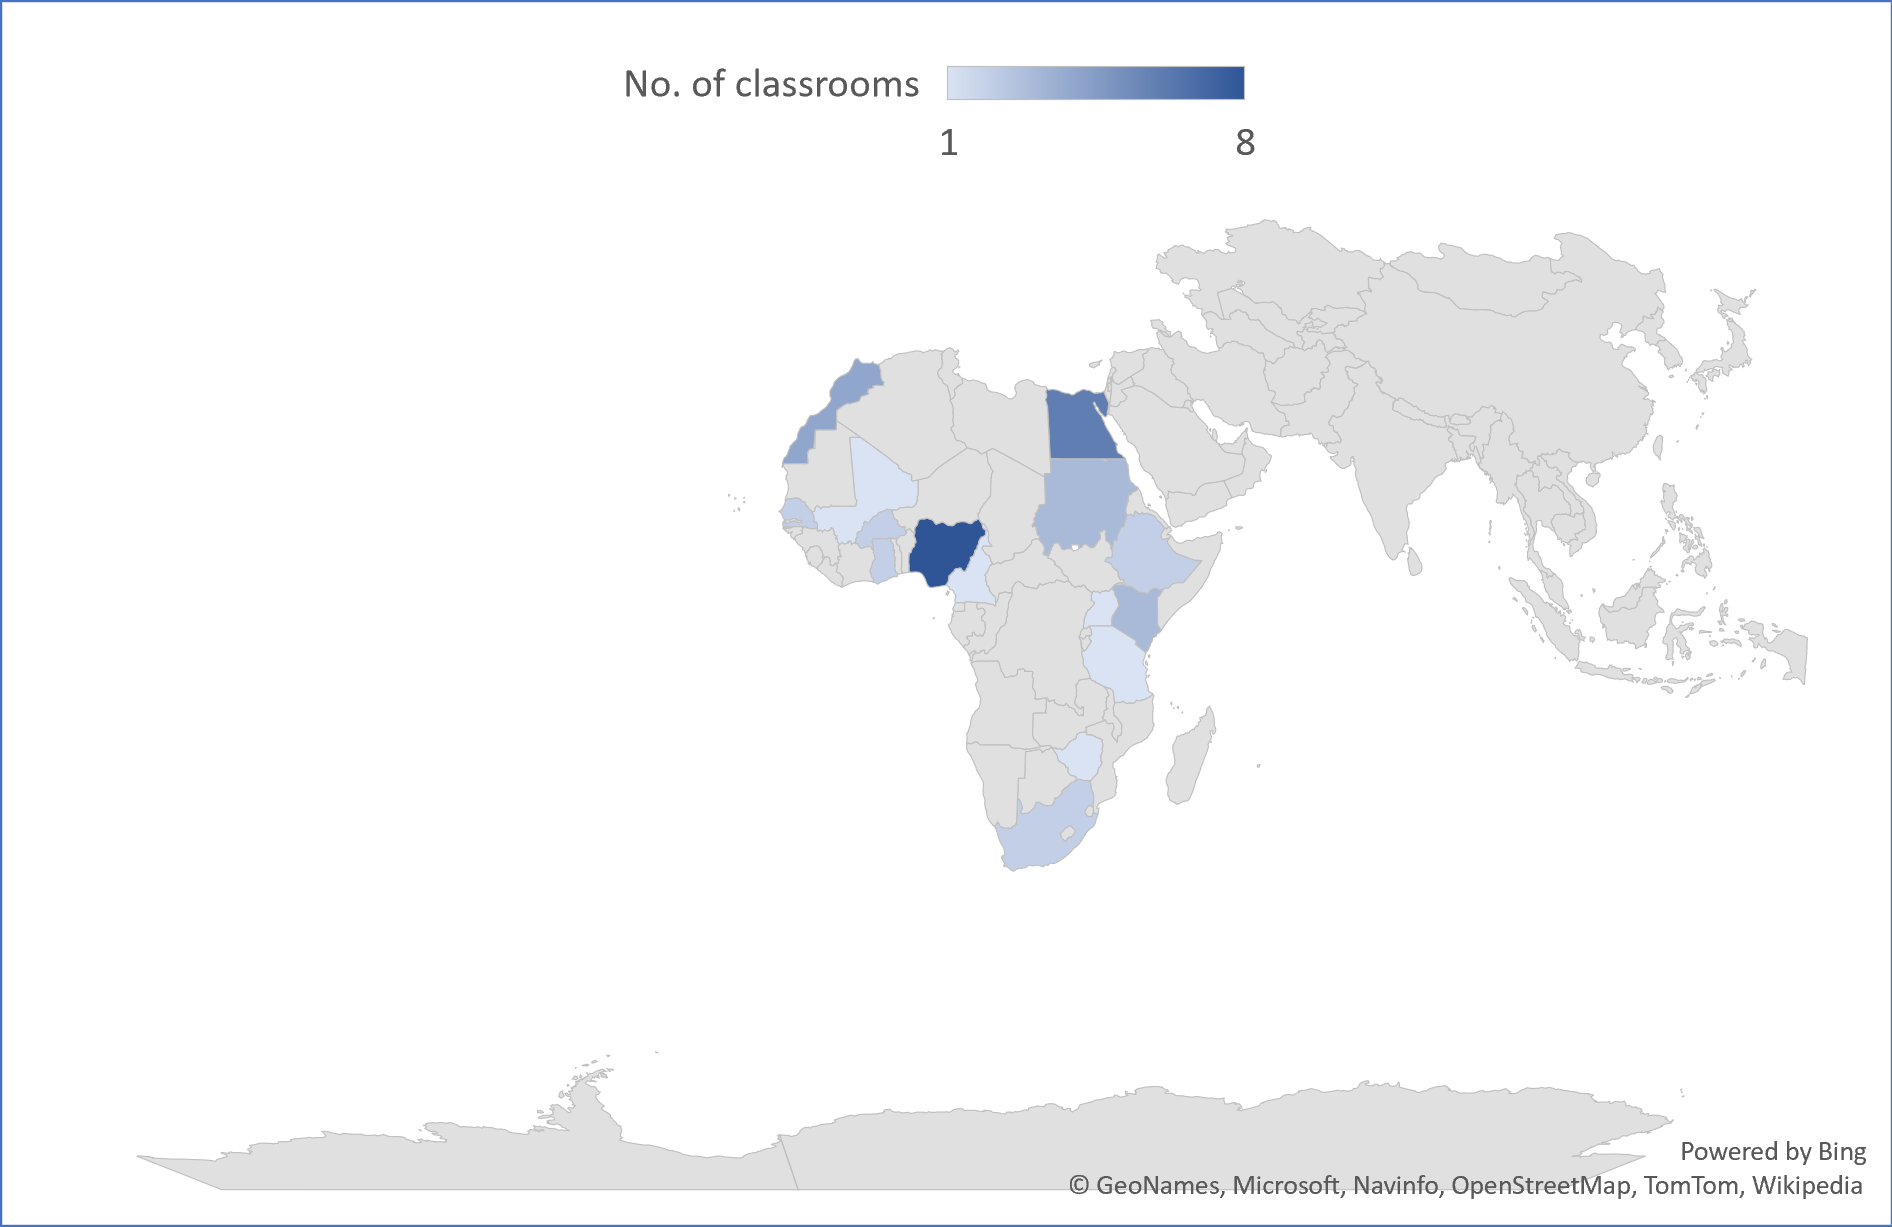 NGS classrooms 2022 map